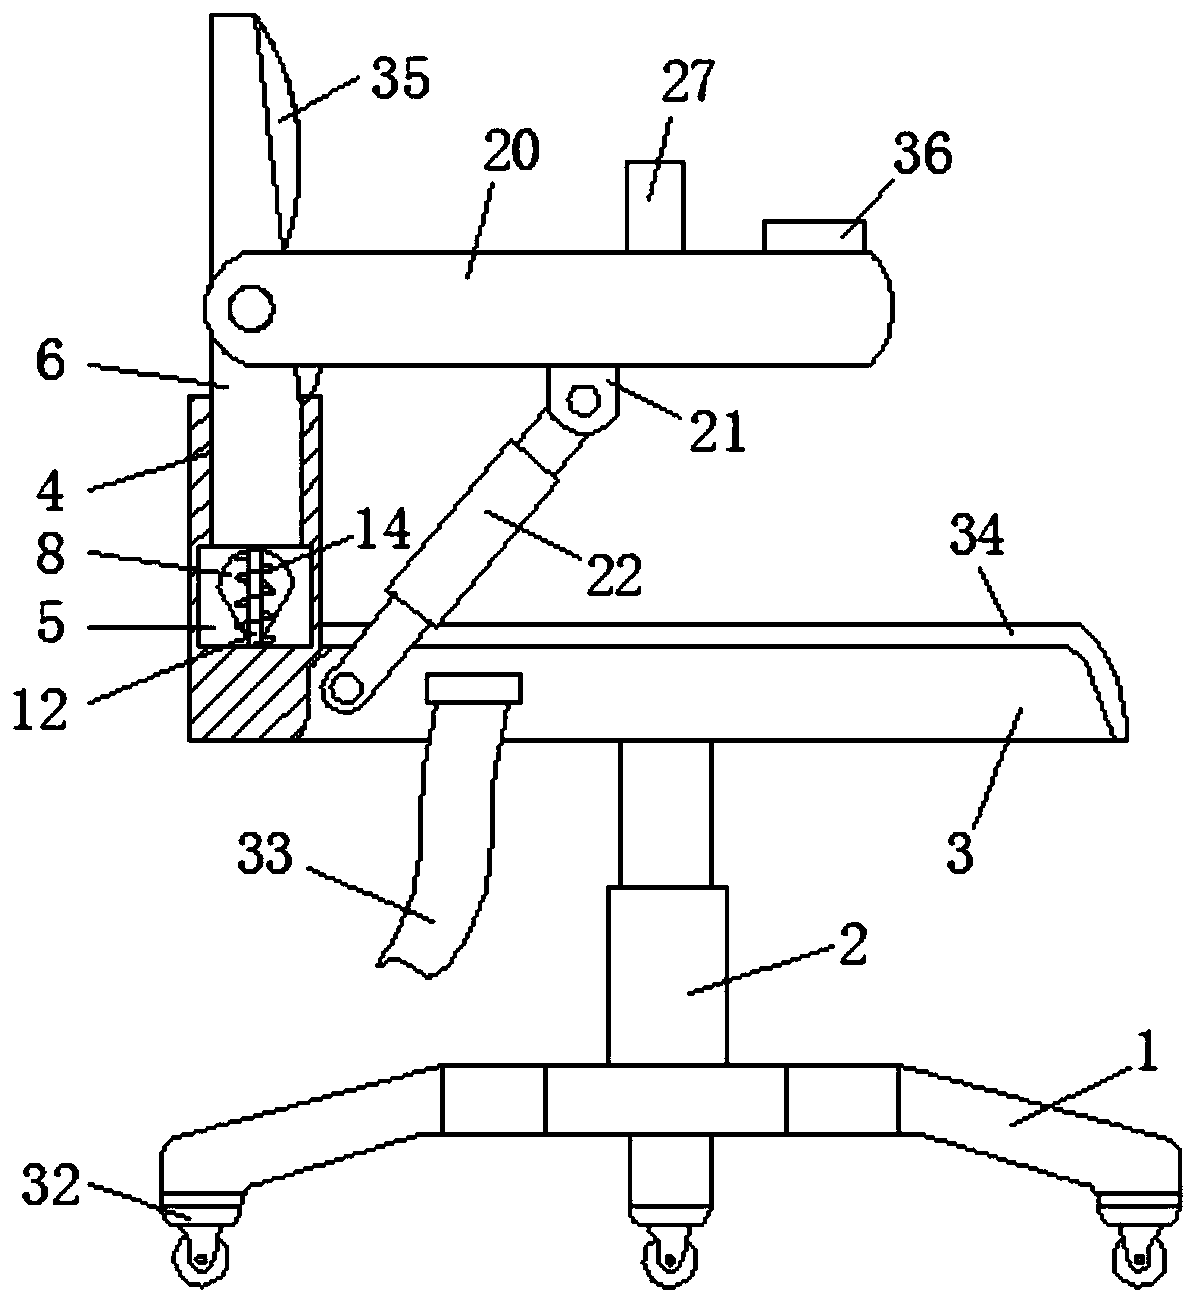 Household lumbar traction device